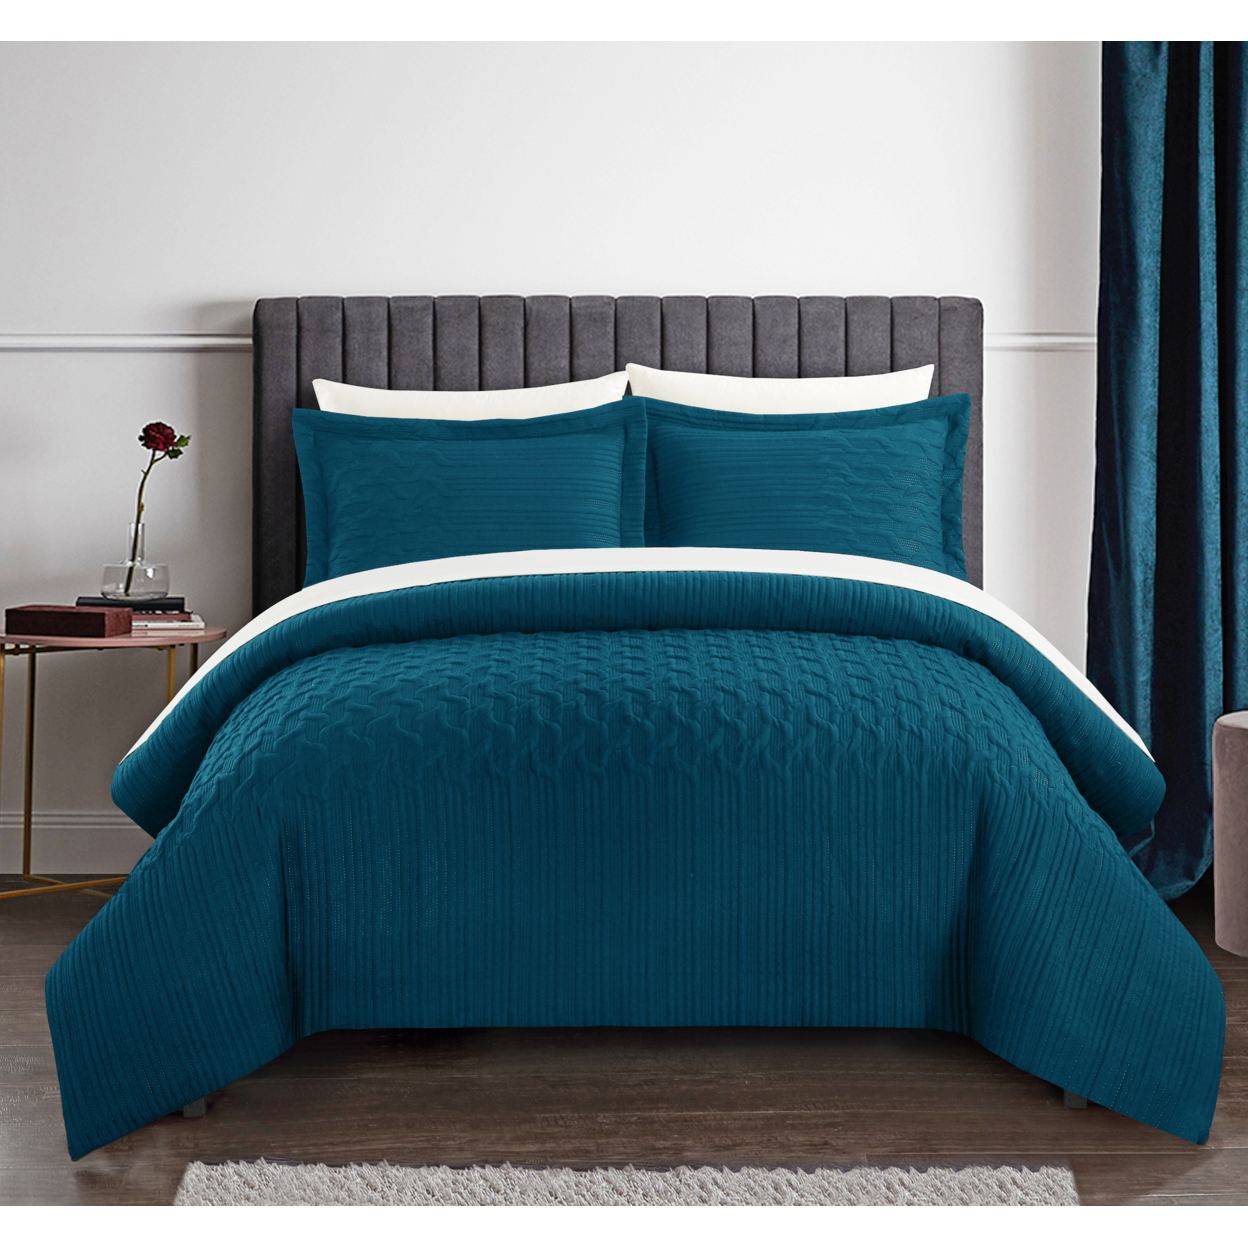 Jazmaine 3 Or 2 Piece Comforter Set Embossed Embroidered Quilted Geometric Vine Pattern Bedding - Teal, Twin